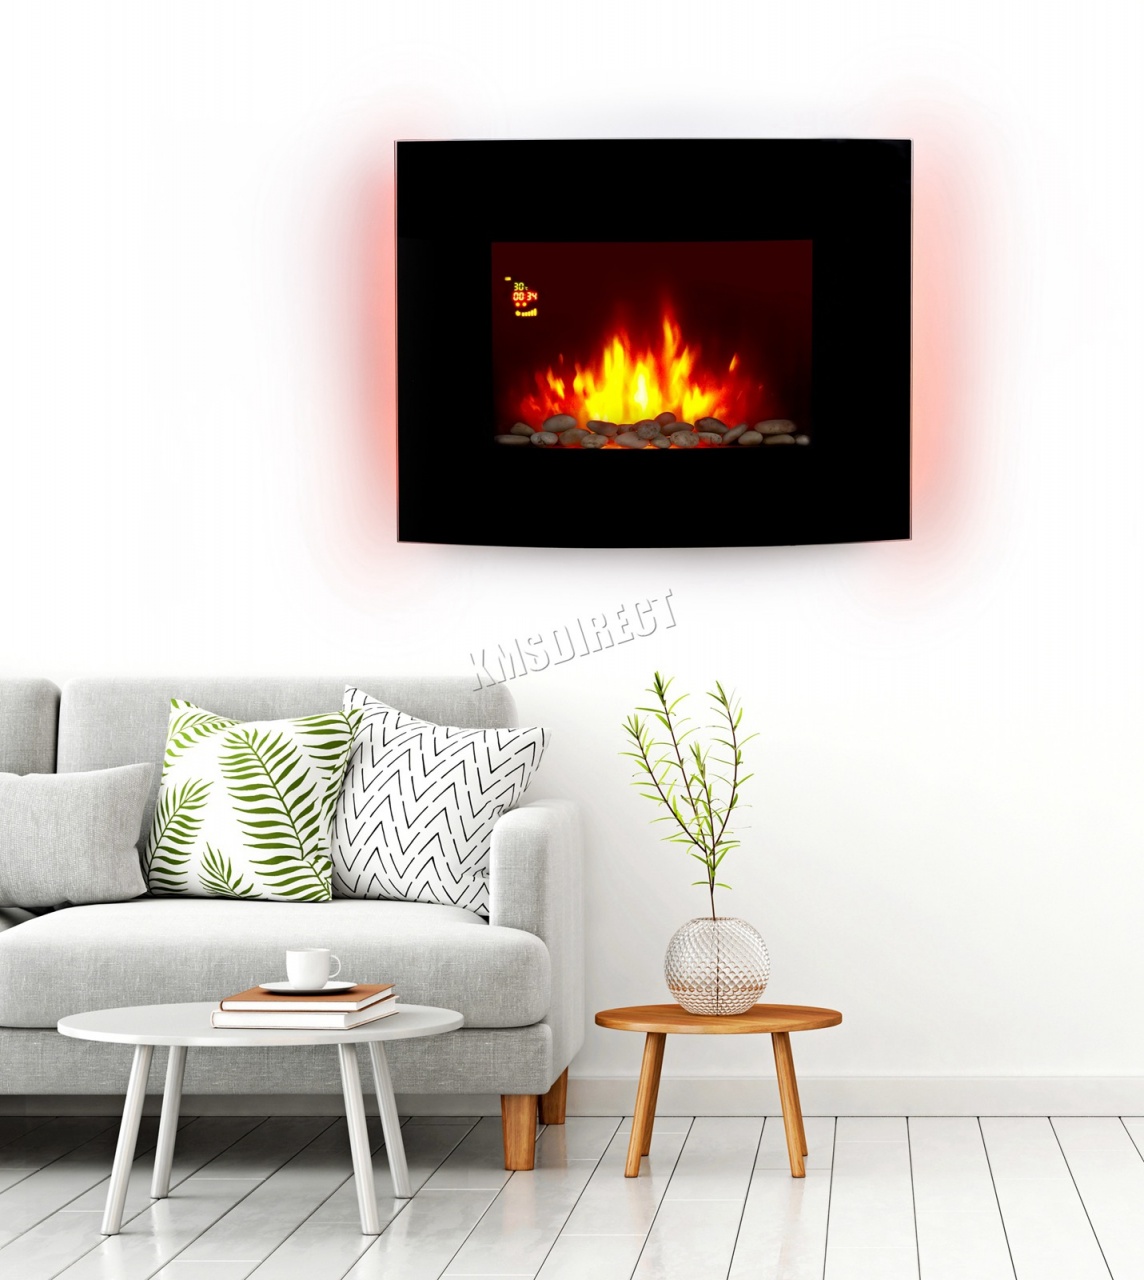 Clearance Big Lots Fireplace Awesome Big Lots Electric Fireplace Tv Stand – Fireplace Ideas From